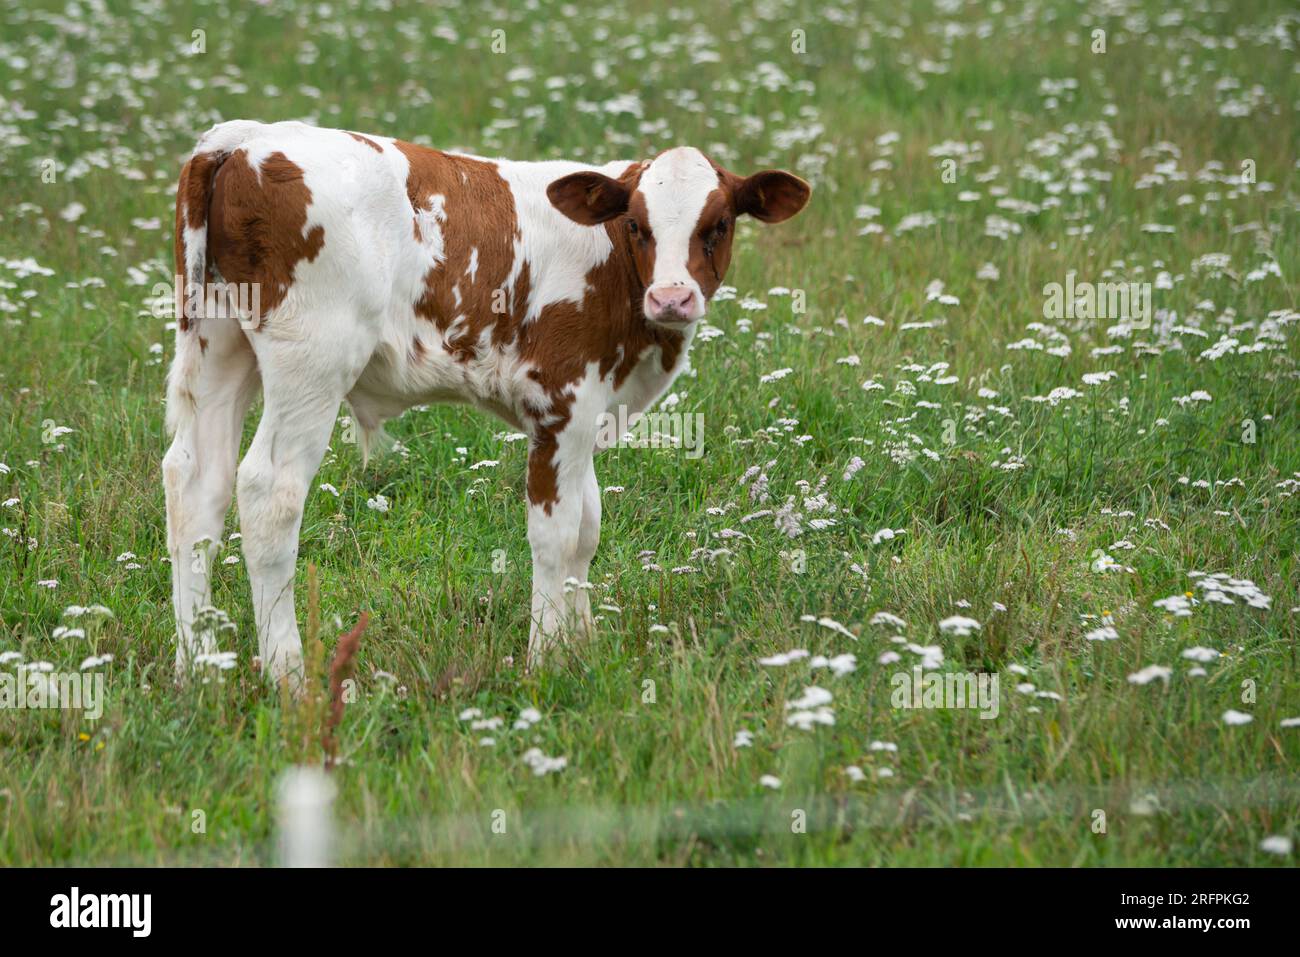 white calf with brown spots is grazing in a green meadow with white flowers and looking directly into the camera. Stock Photo